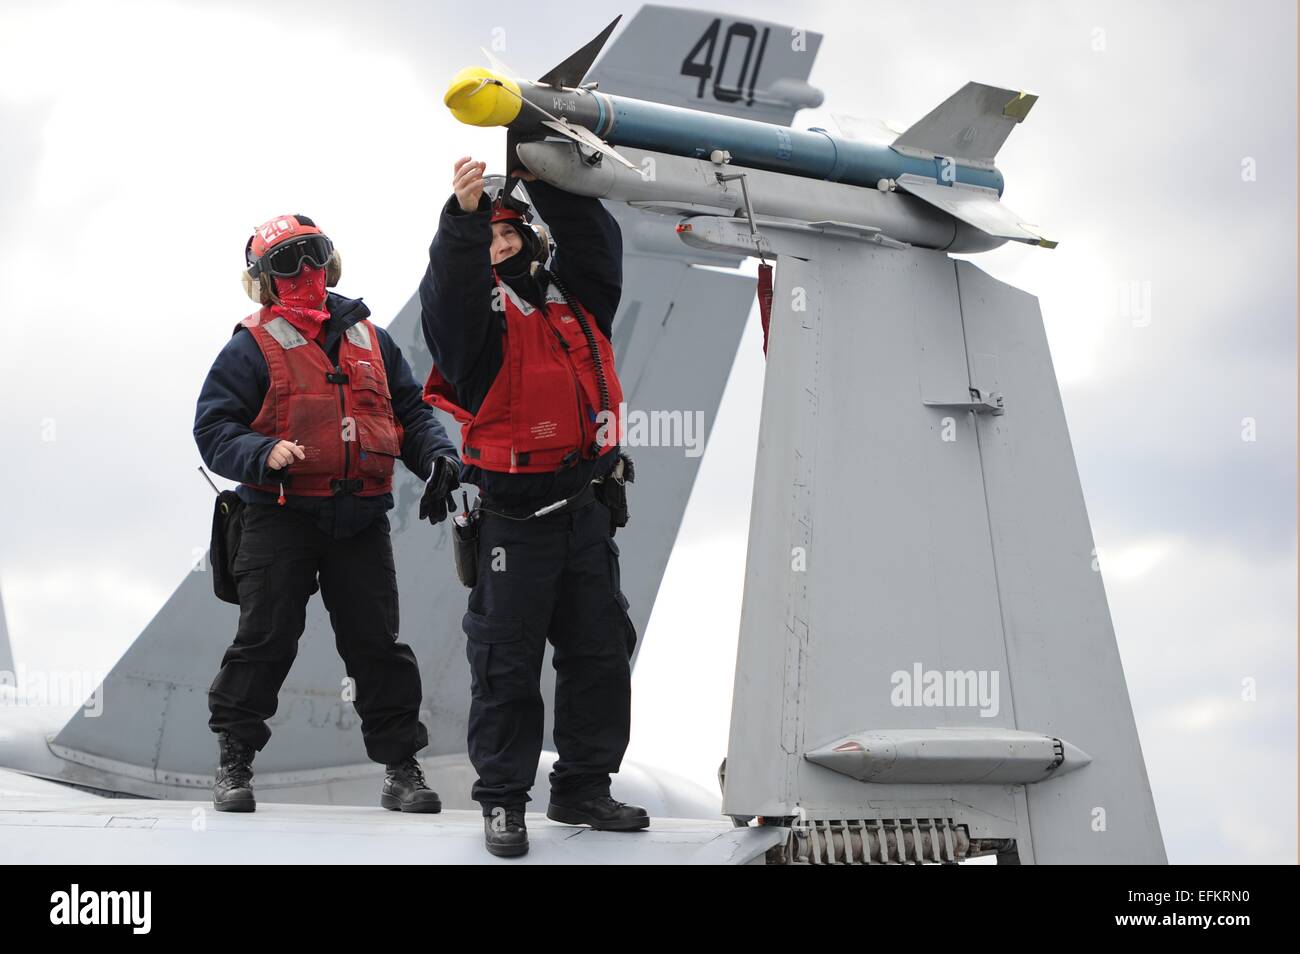 US Navy Ordananceman verify serial numbers on a Sidewinder practice missile while standing on an FA-18C Hornet aircraft aboard the aircraft carrier USS George H.W. Bush during training operations February 3, 2015 in the Atlantic Ocean. Stock Photo